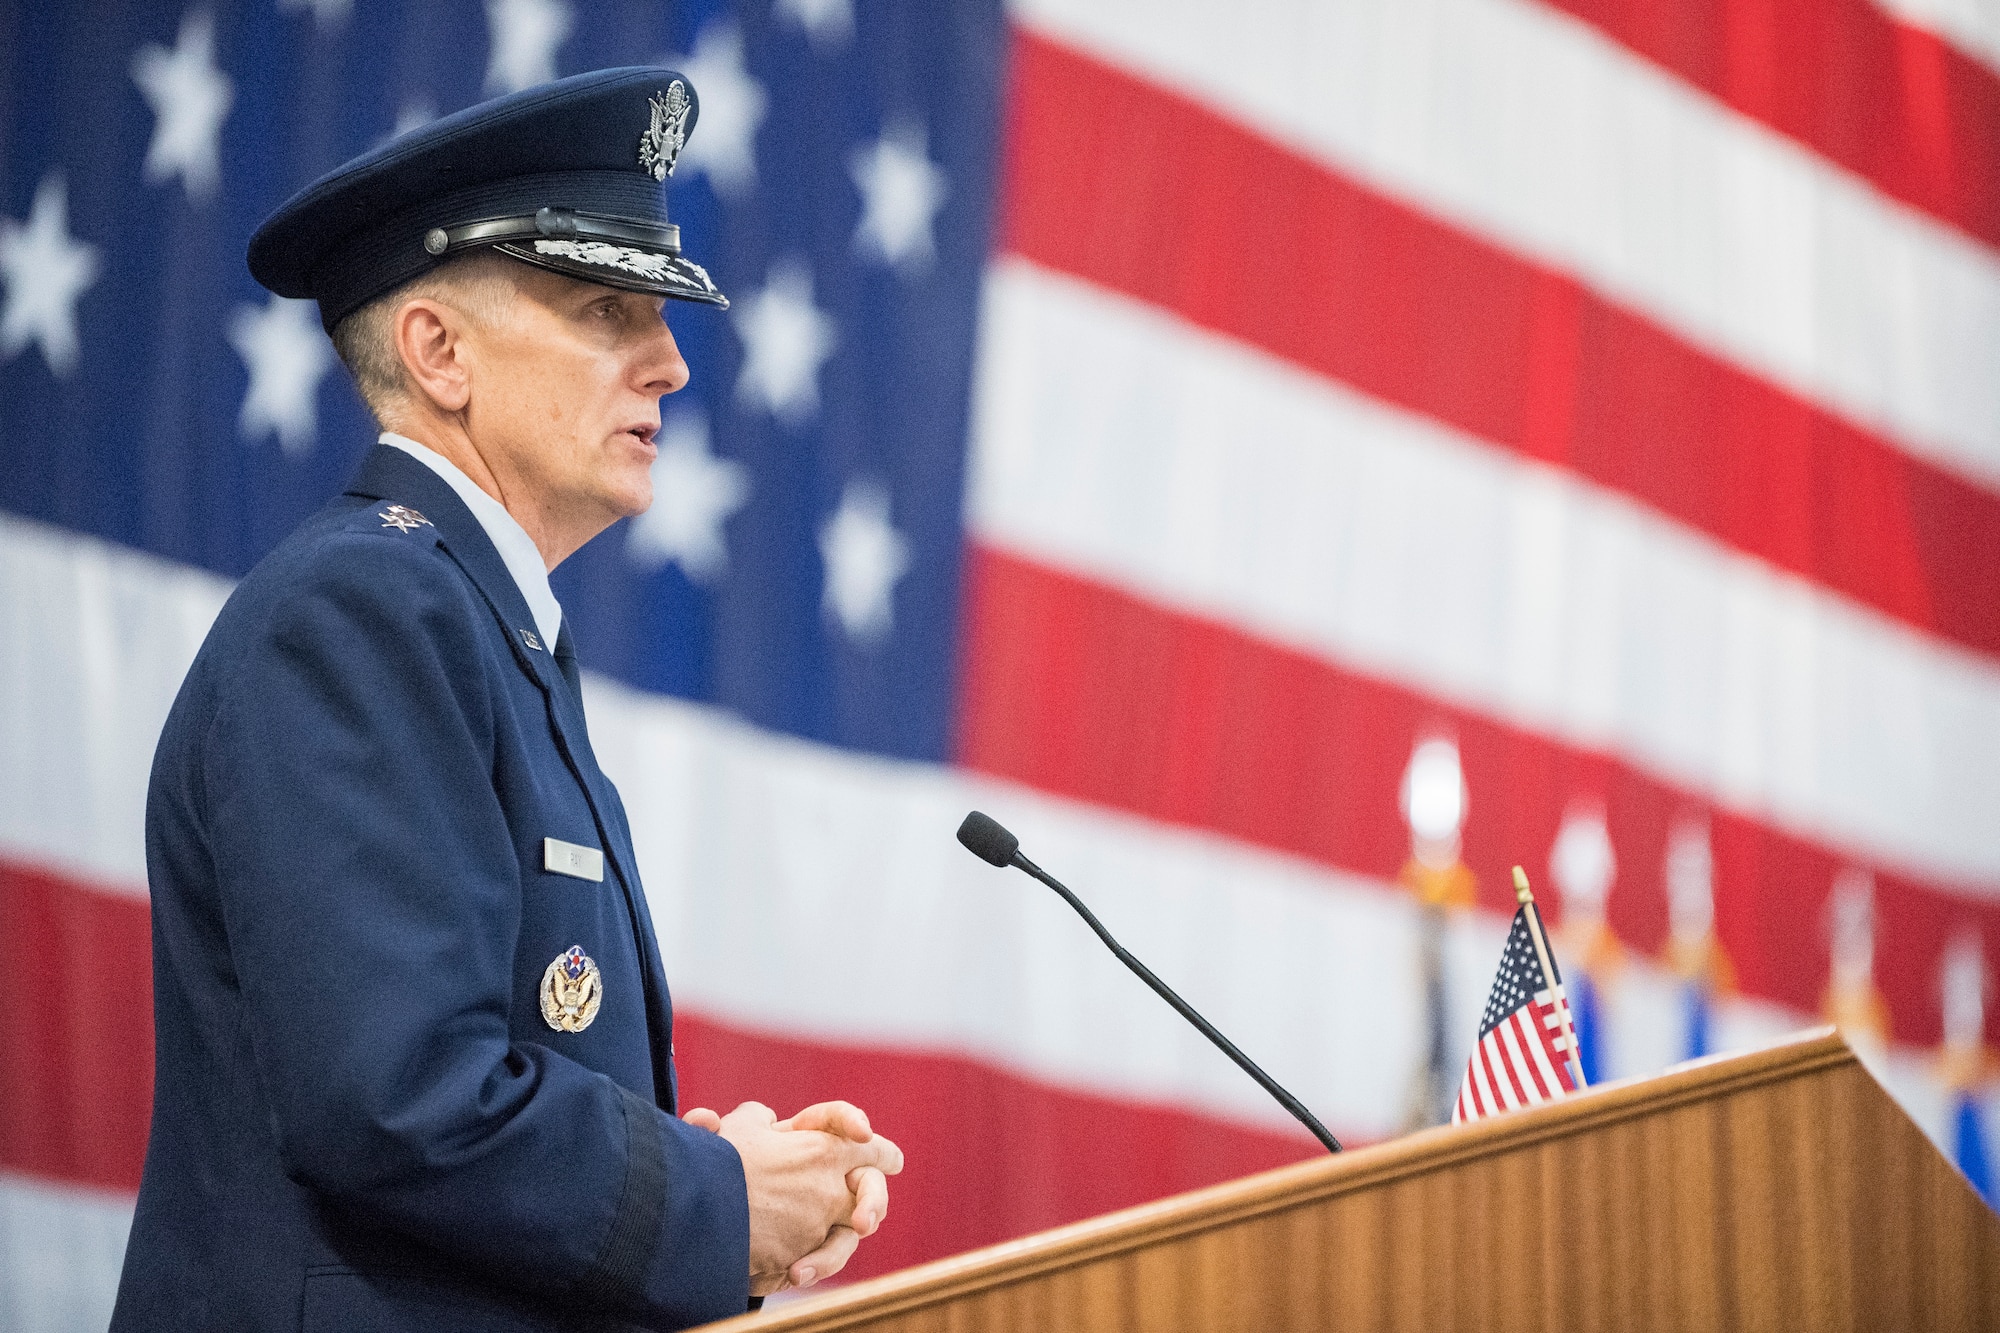 Gen. Timothy Ray addresses the audience after assuming command of Air Force Global Strike Command during a ceremony at Barksdale Air Force Base, La., Aug. 21, 2018